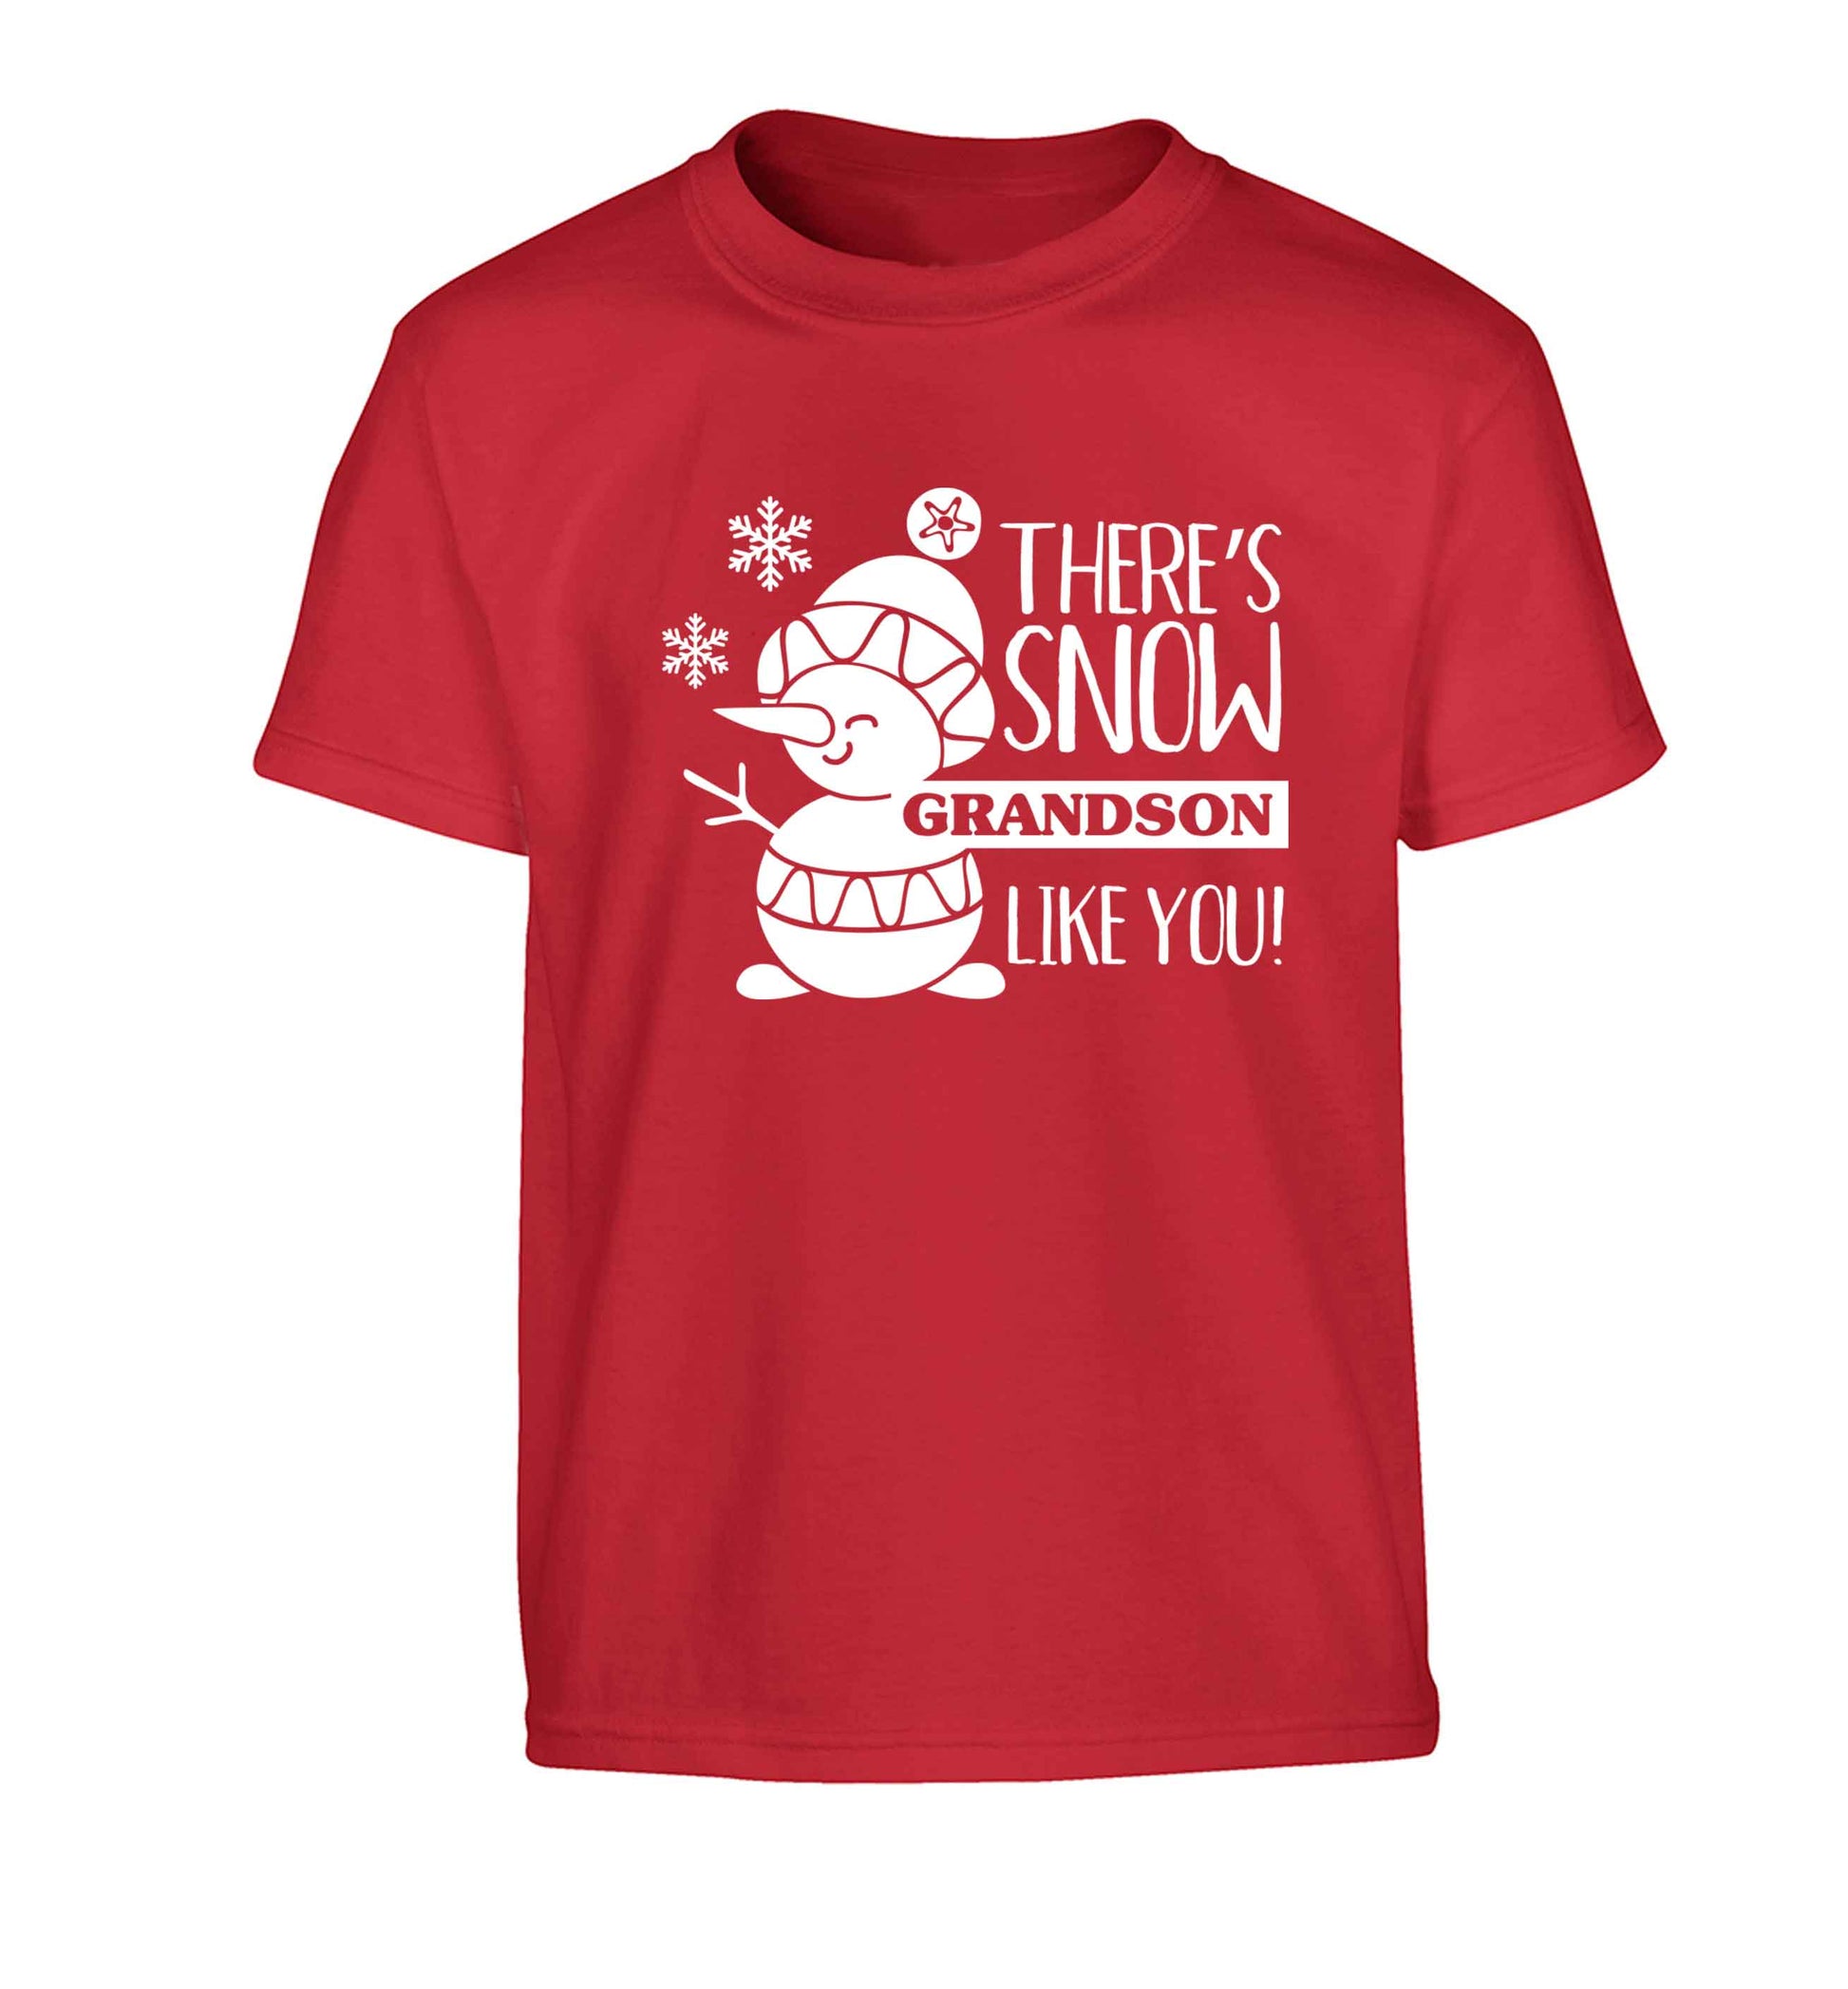 There's snow grandson like you Children's red Tshirt 12-13 Years